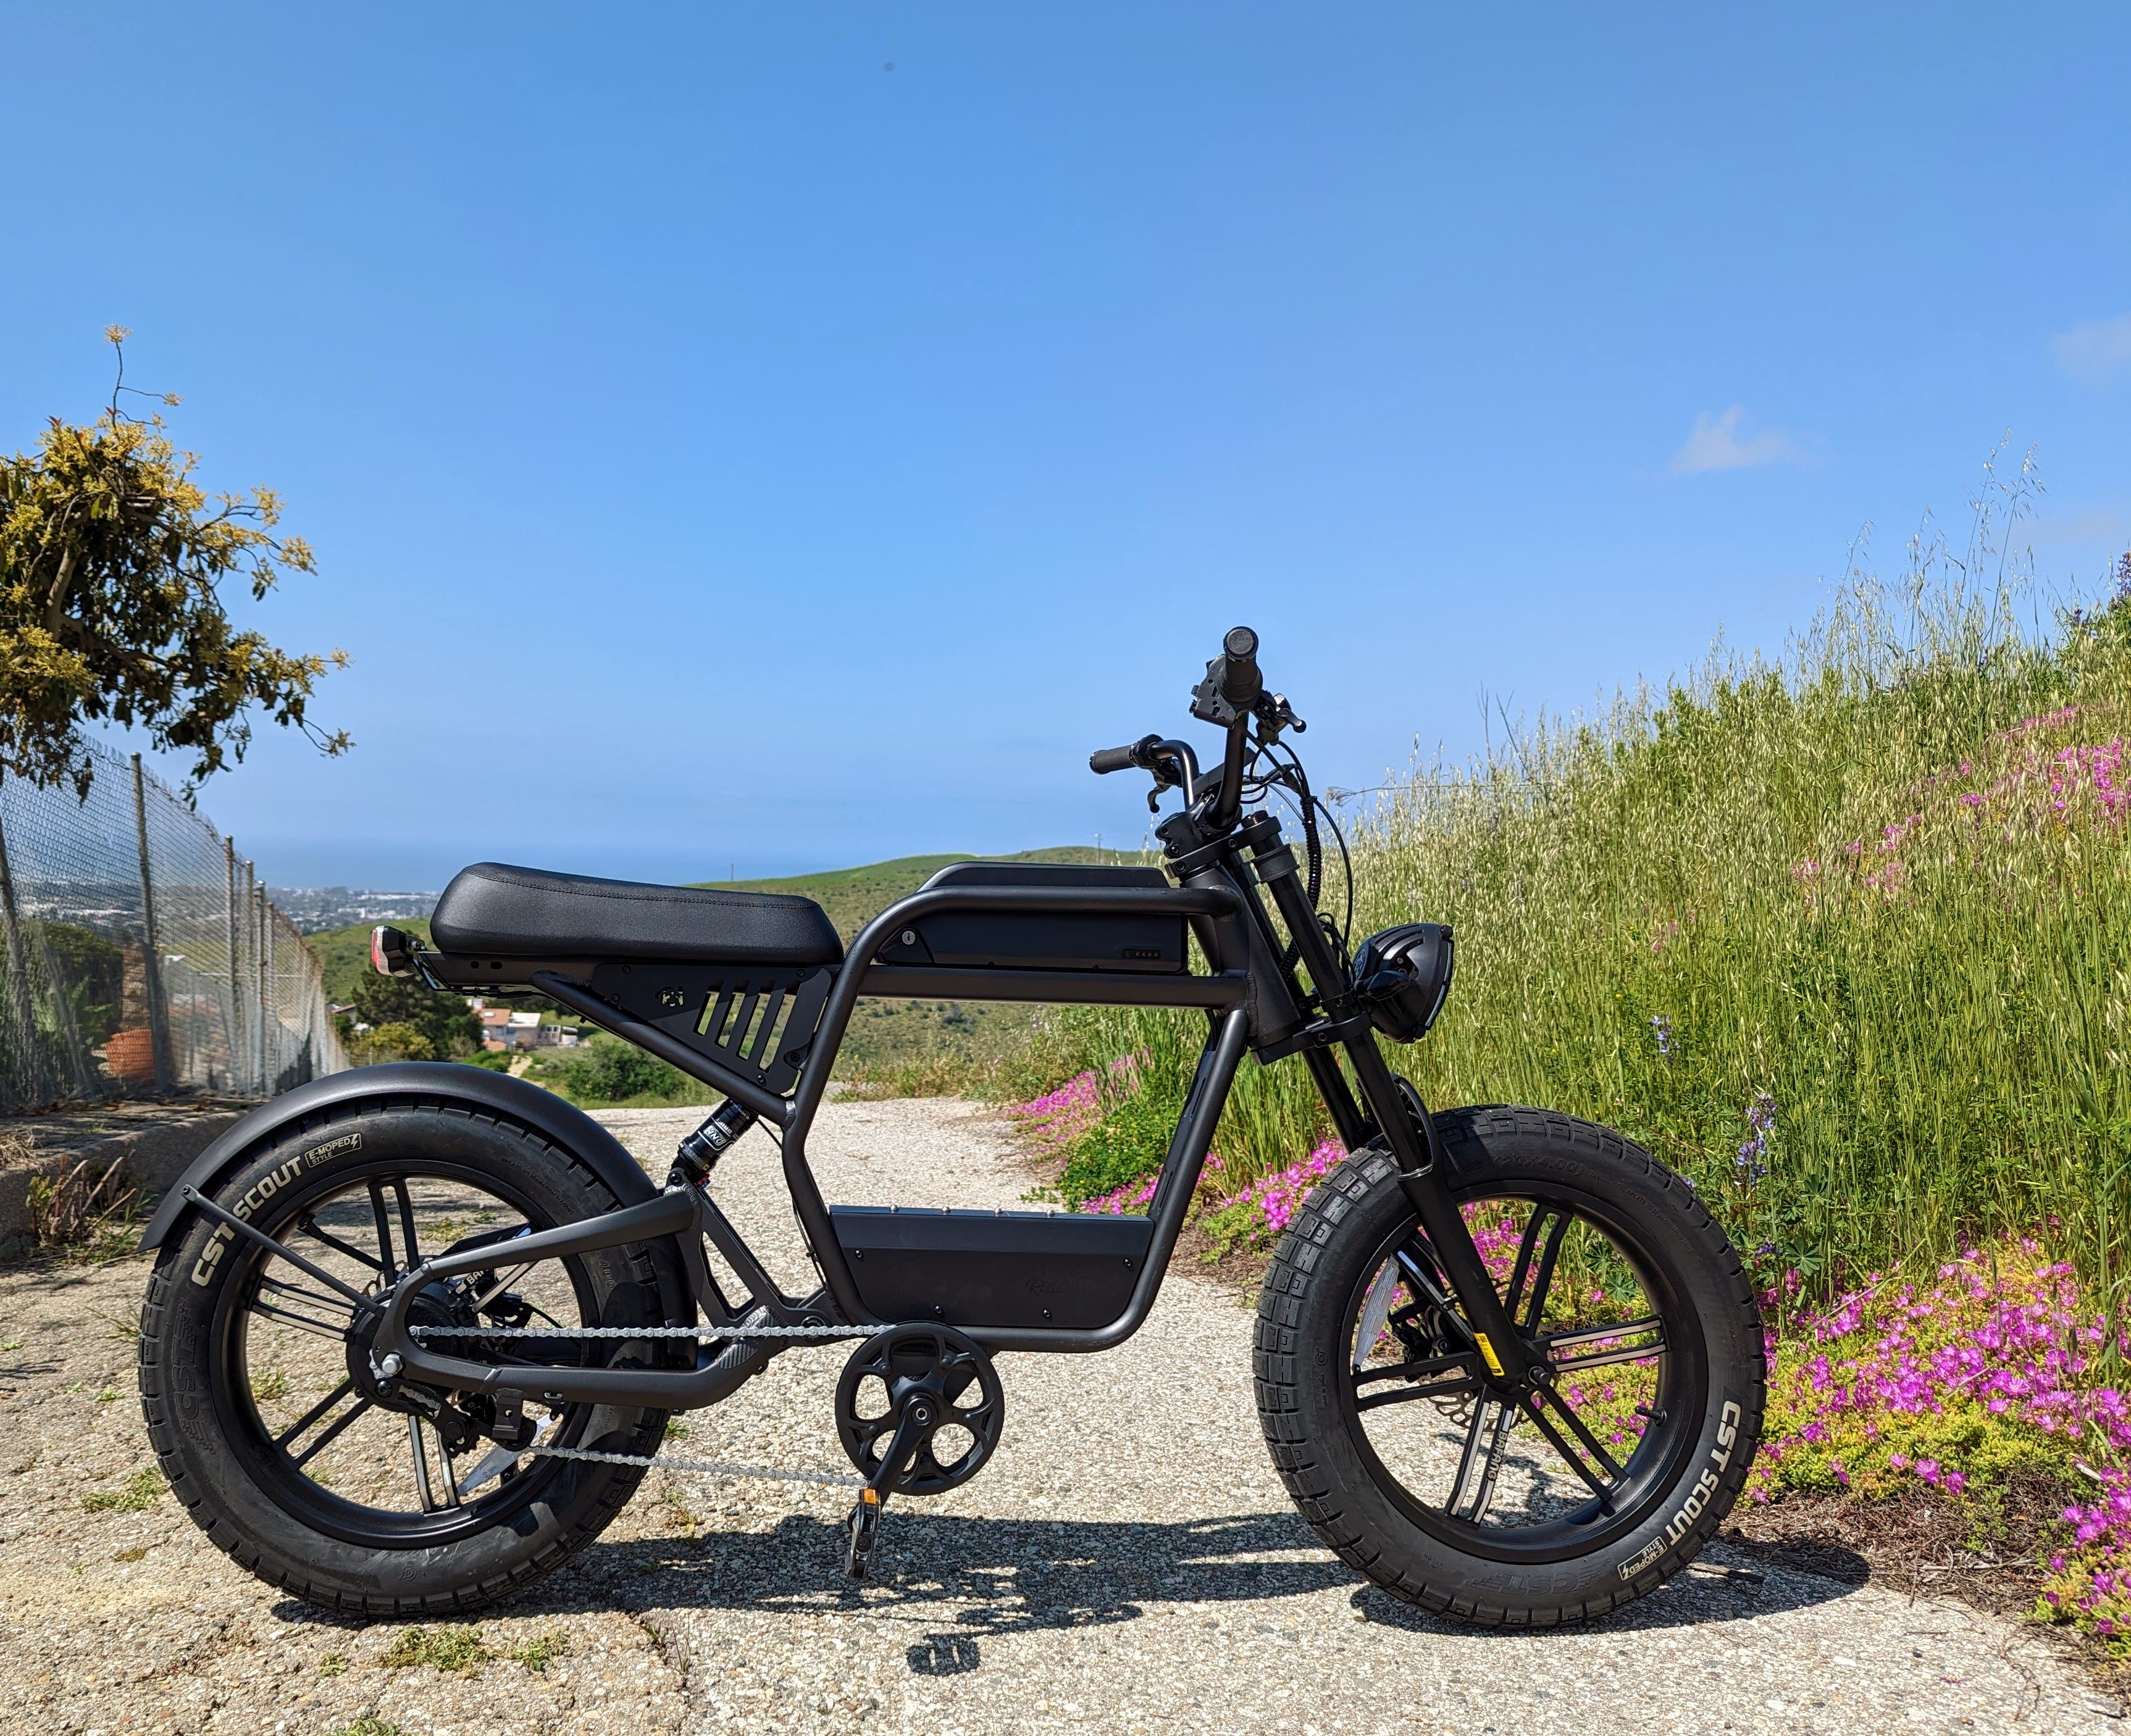 https://cleantechnica.com/wp-content/uploads/2023/05/2023.04-ride1up-revv-emoped-ebike-electric-bicycle-KYLE-1.jpg